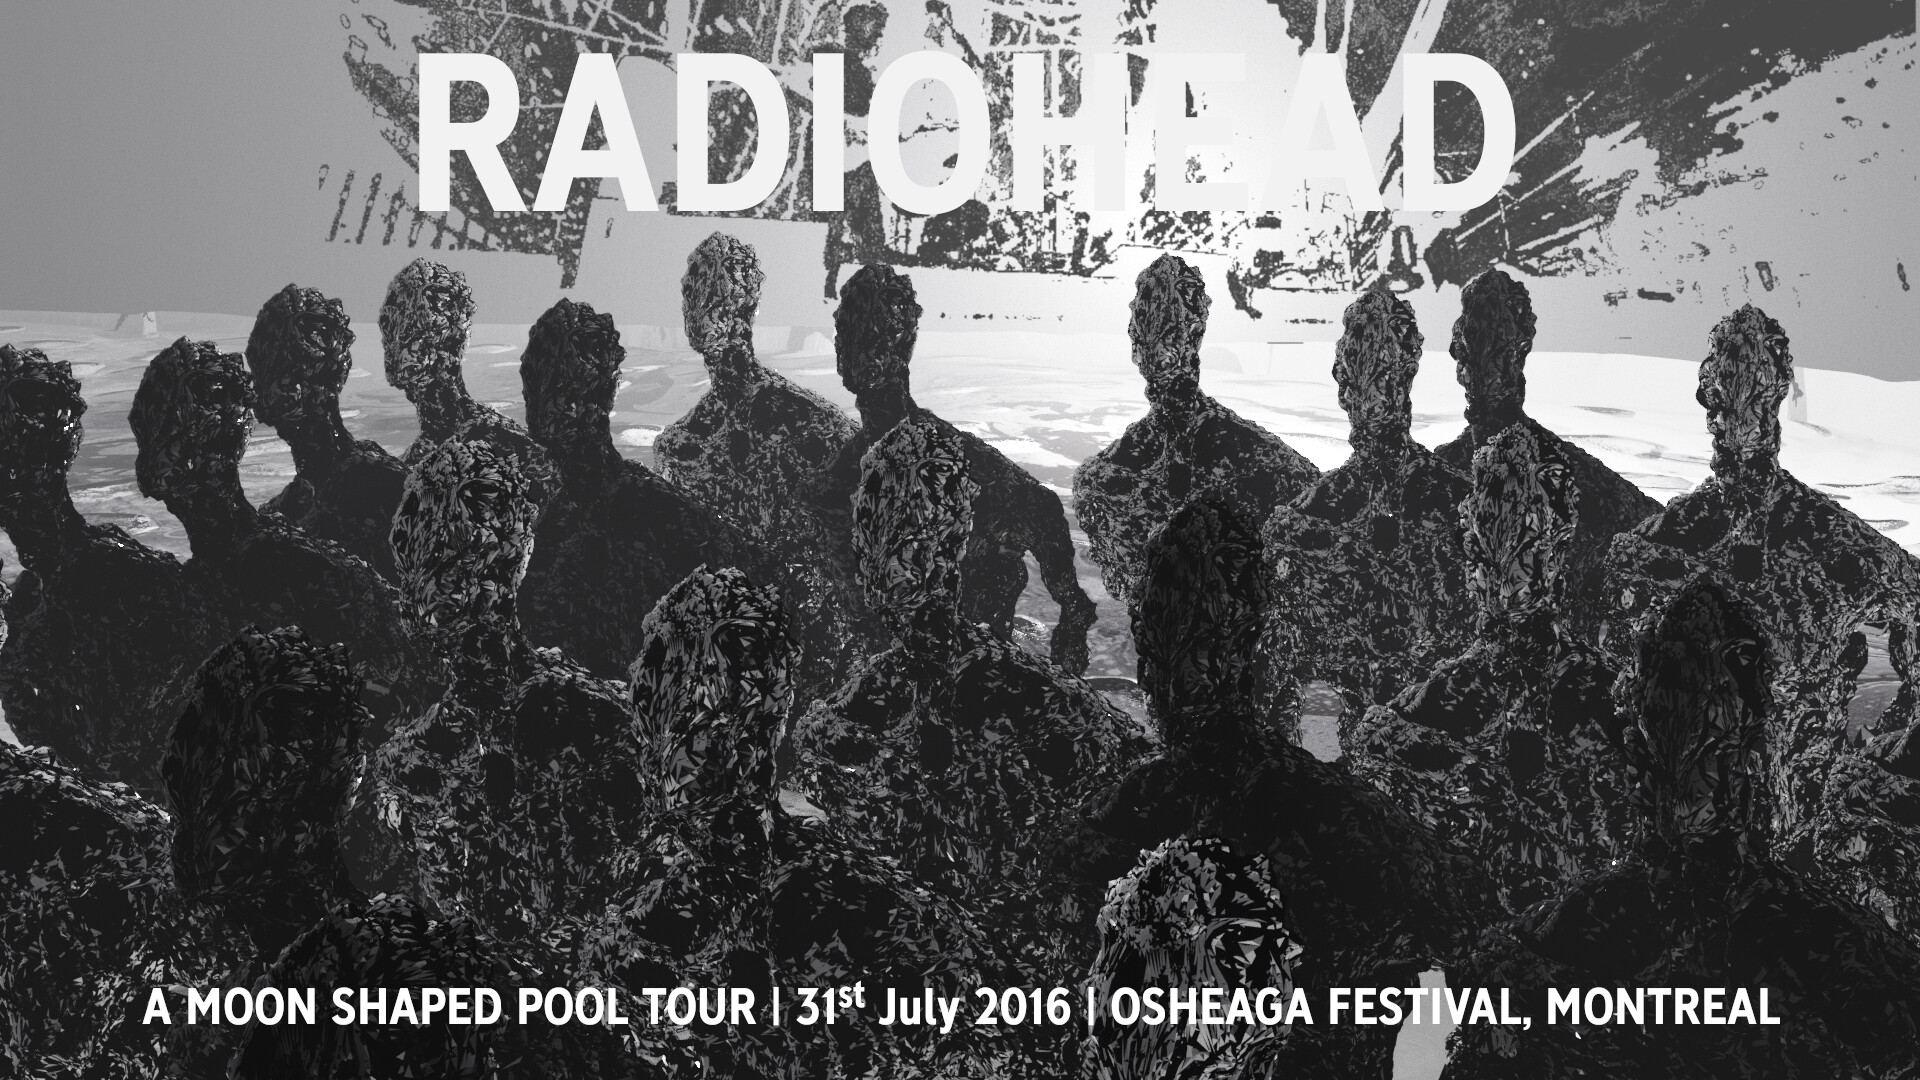 ArtStation - Radiohead, Montreal, 31 July 2016 [A Moon Shaped Pool turns  five submission]